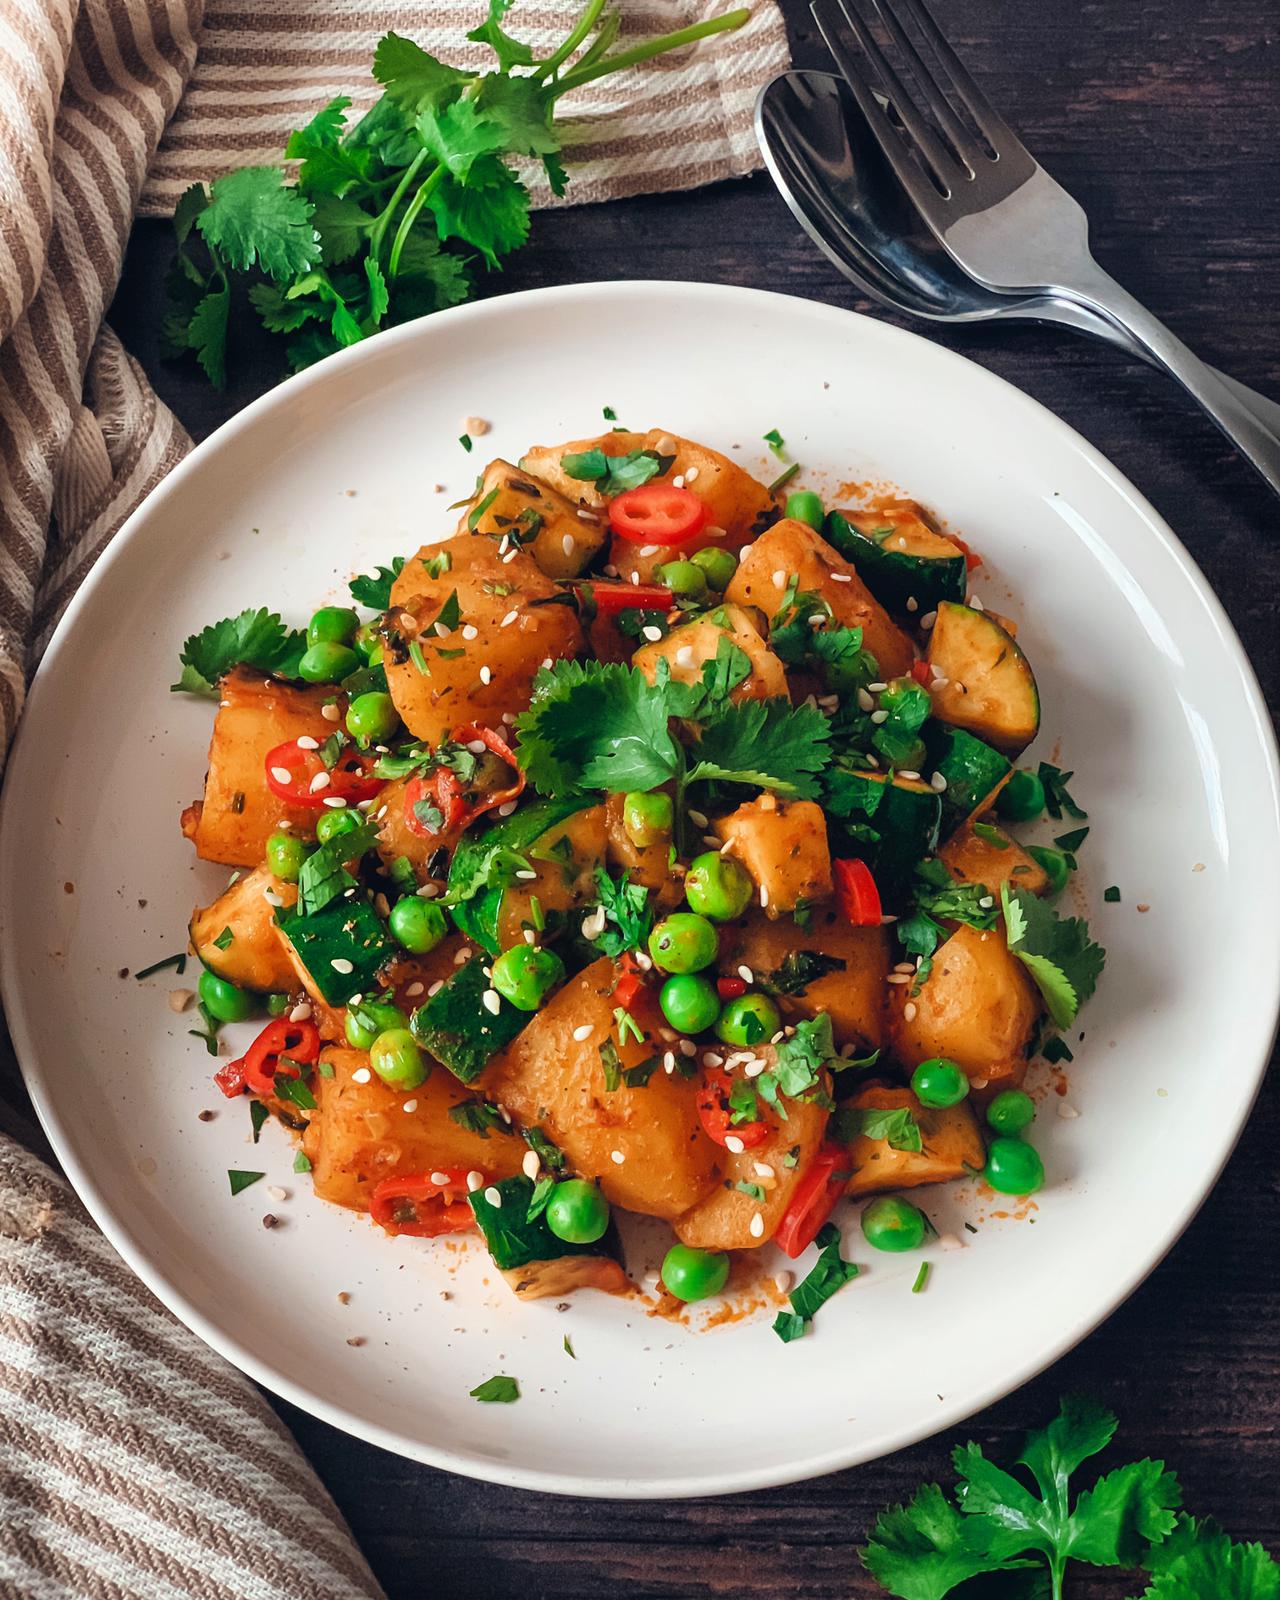 Spicy-Curried-Potatoes with Peas and Courgettes